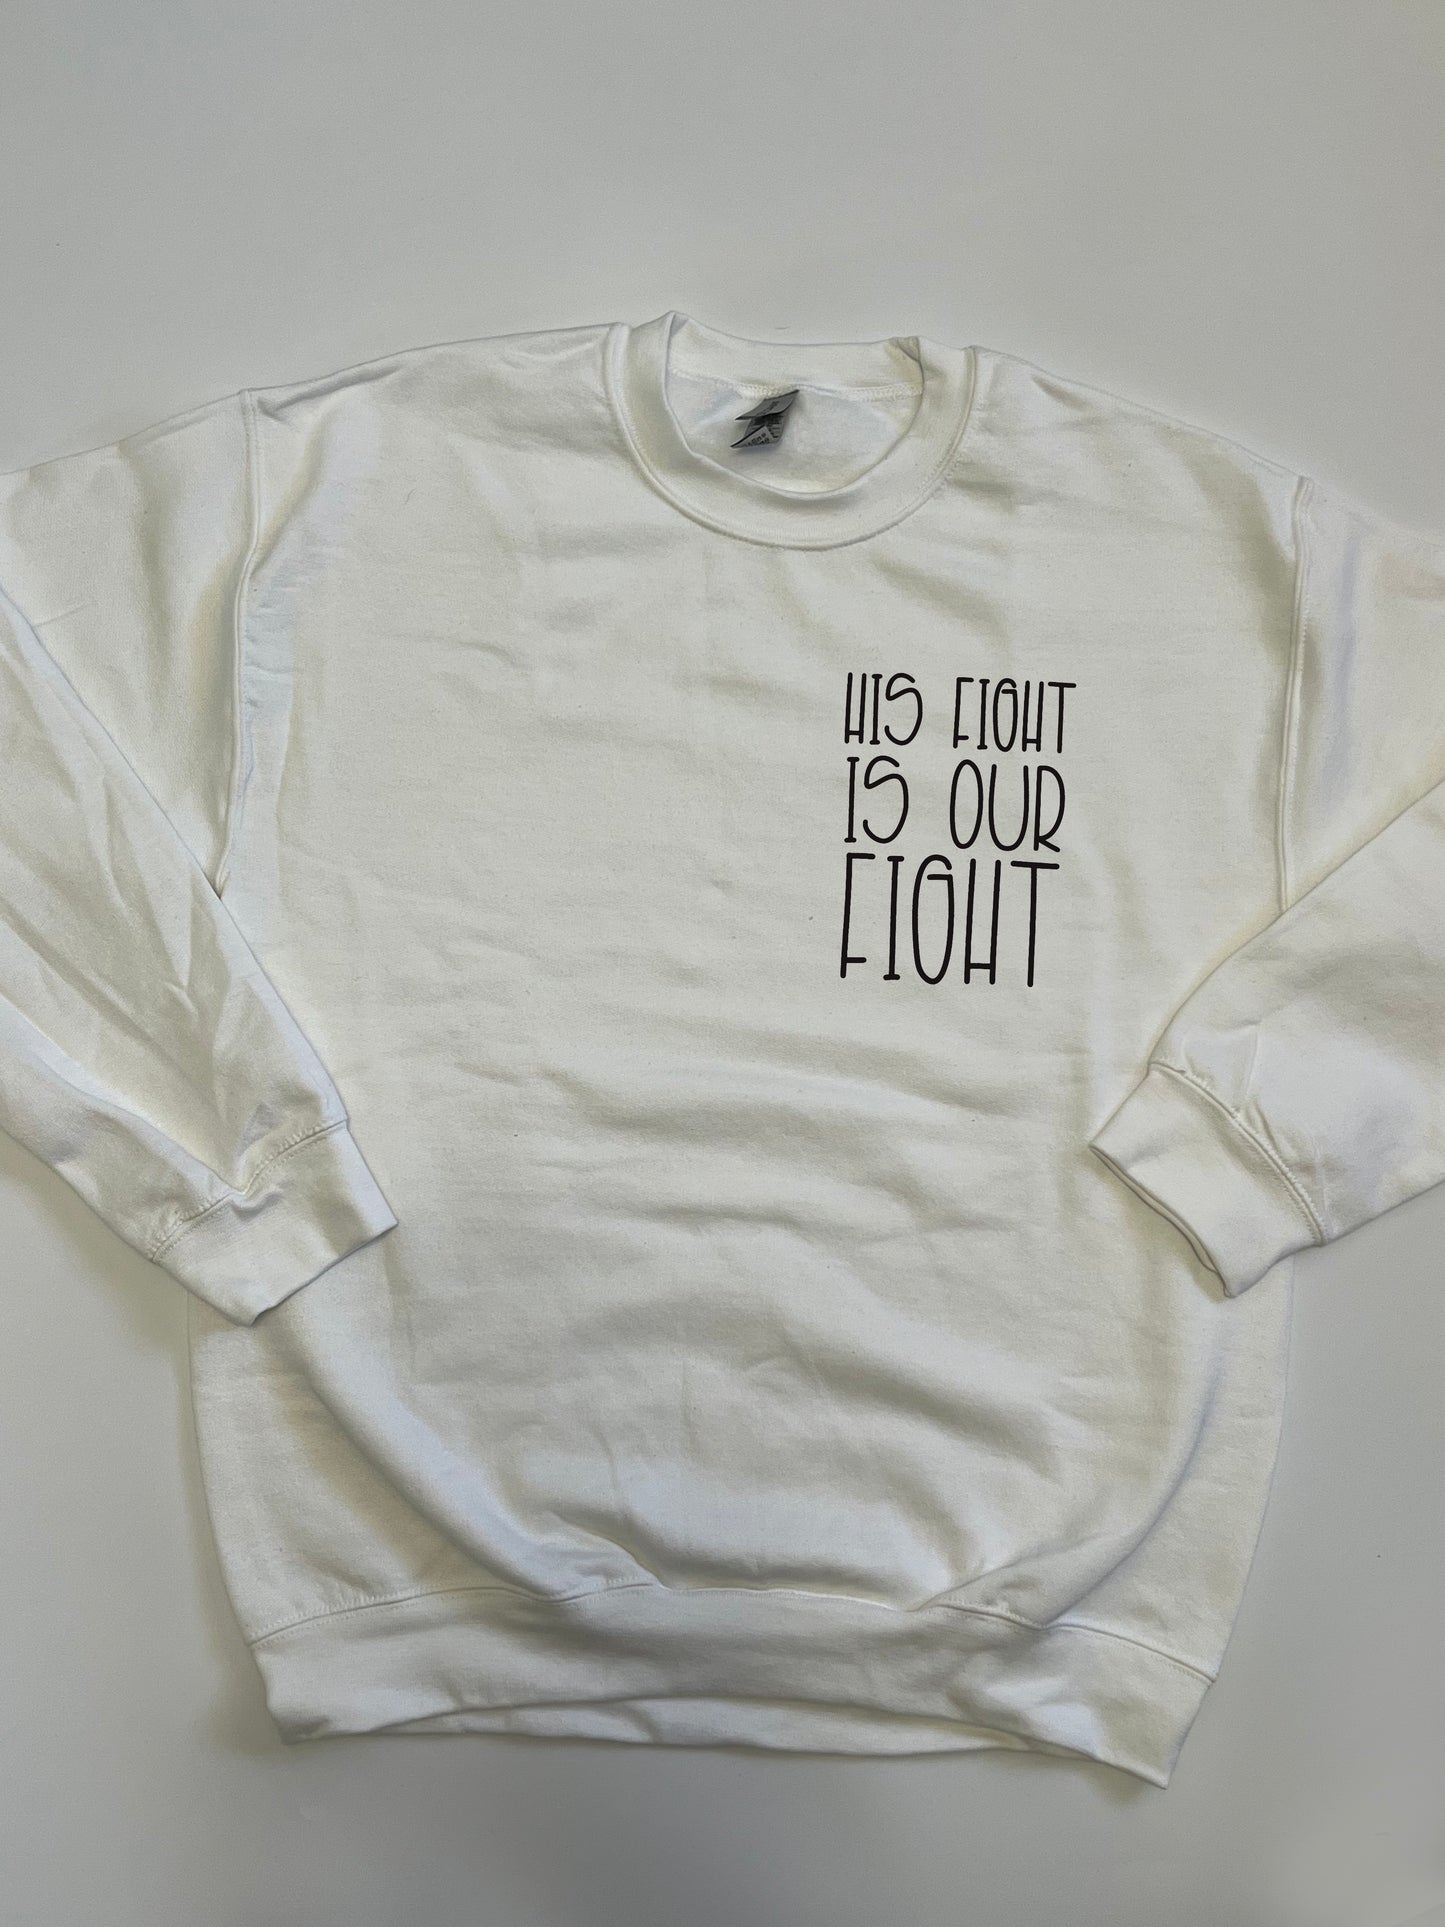 ADULT. LONG SLEEVE TSHIRT. OUR FIGHT. PREORDER.